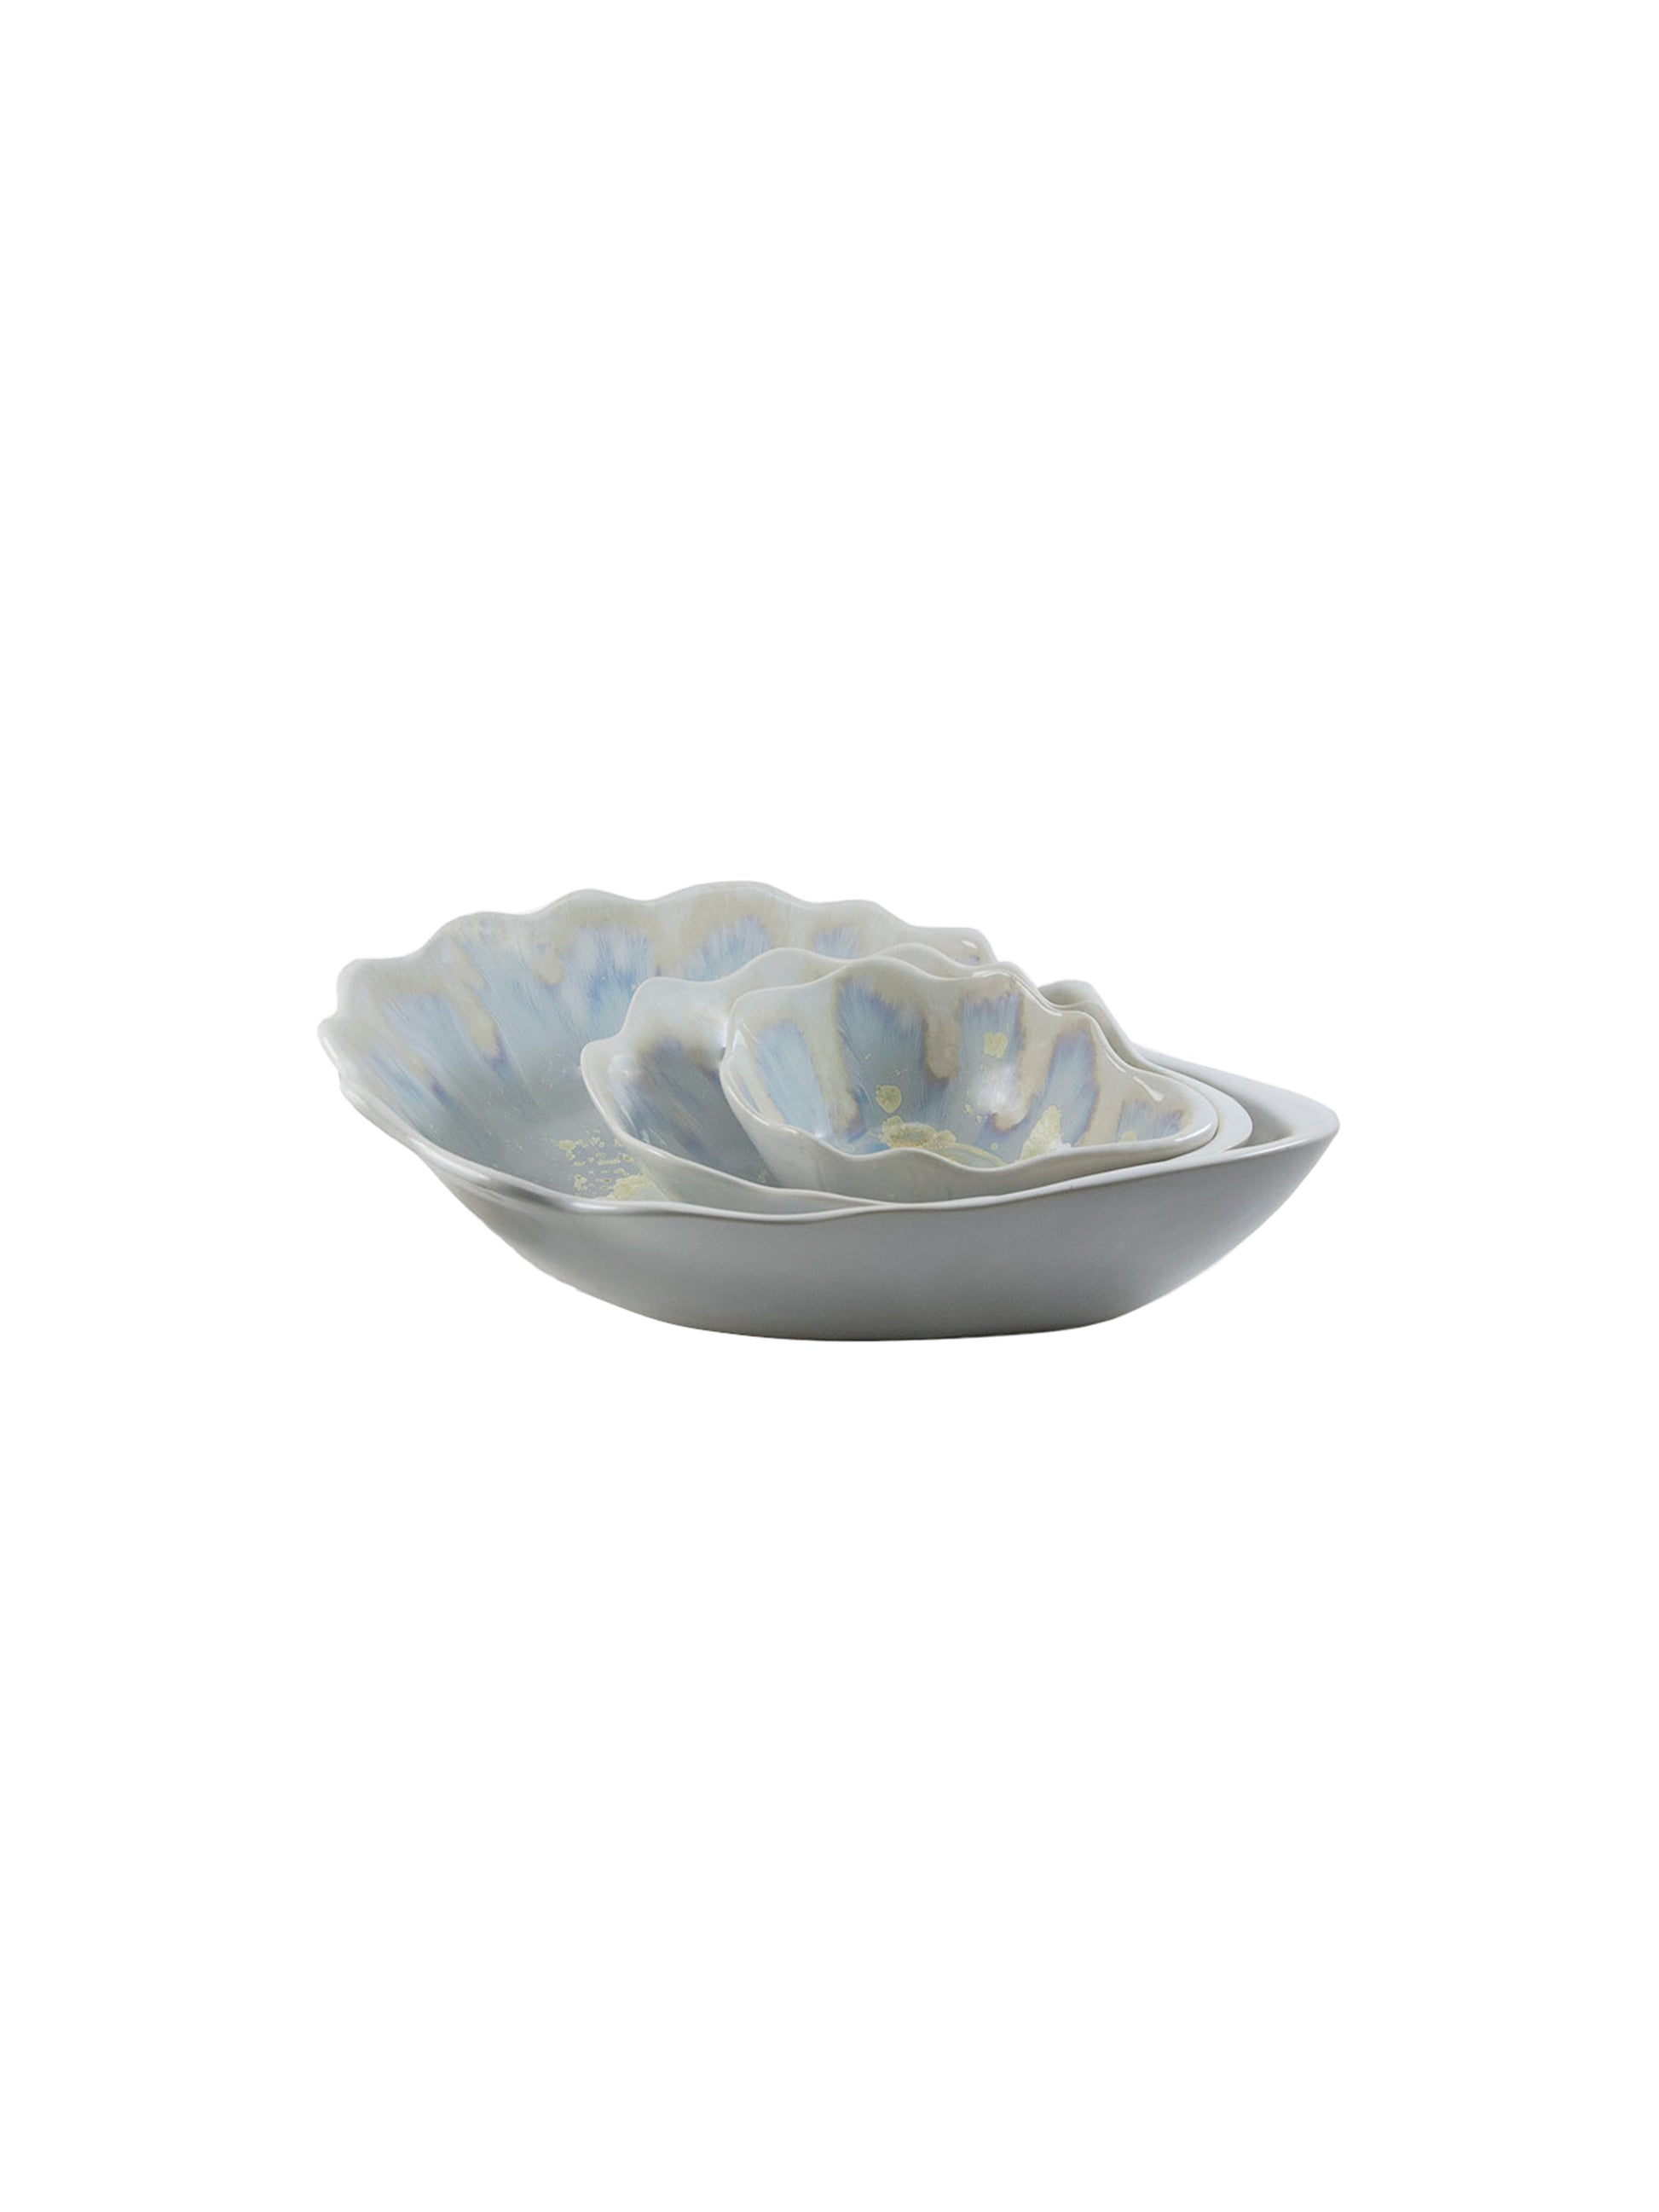 Alison Evans Oyster Series Nesting Bowl Pearl Weston Table